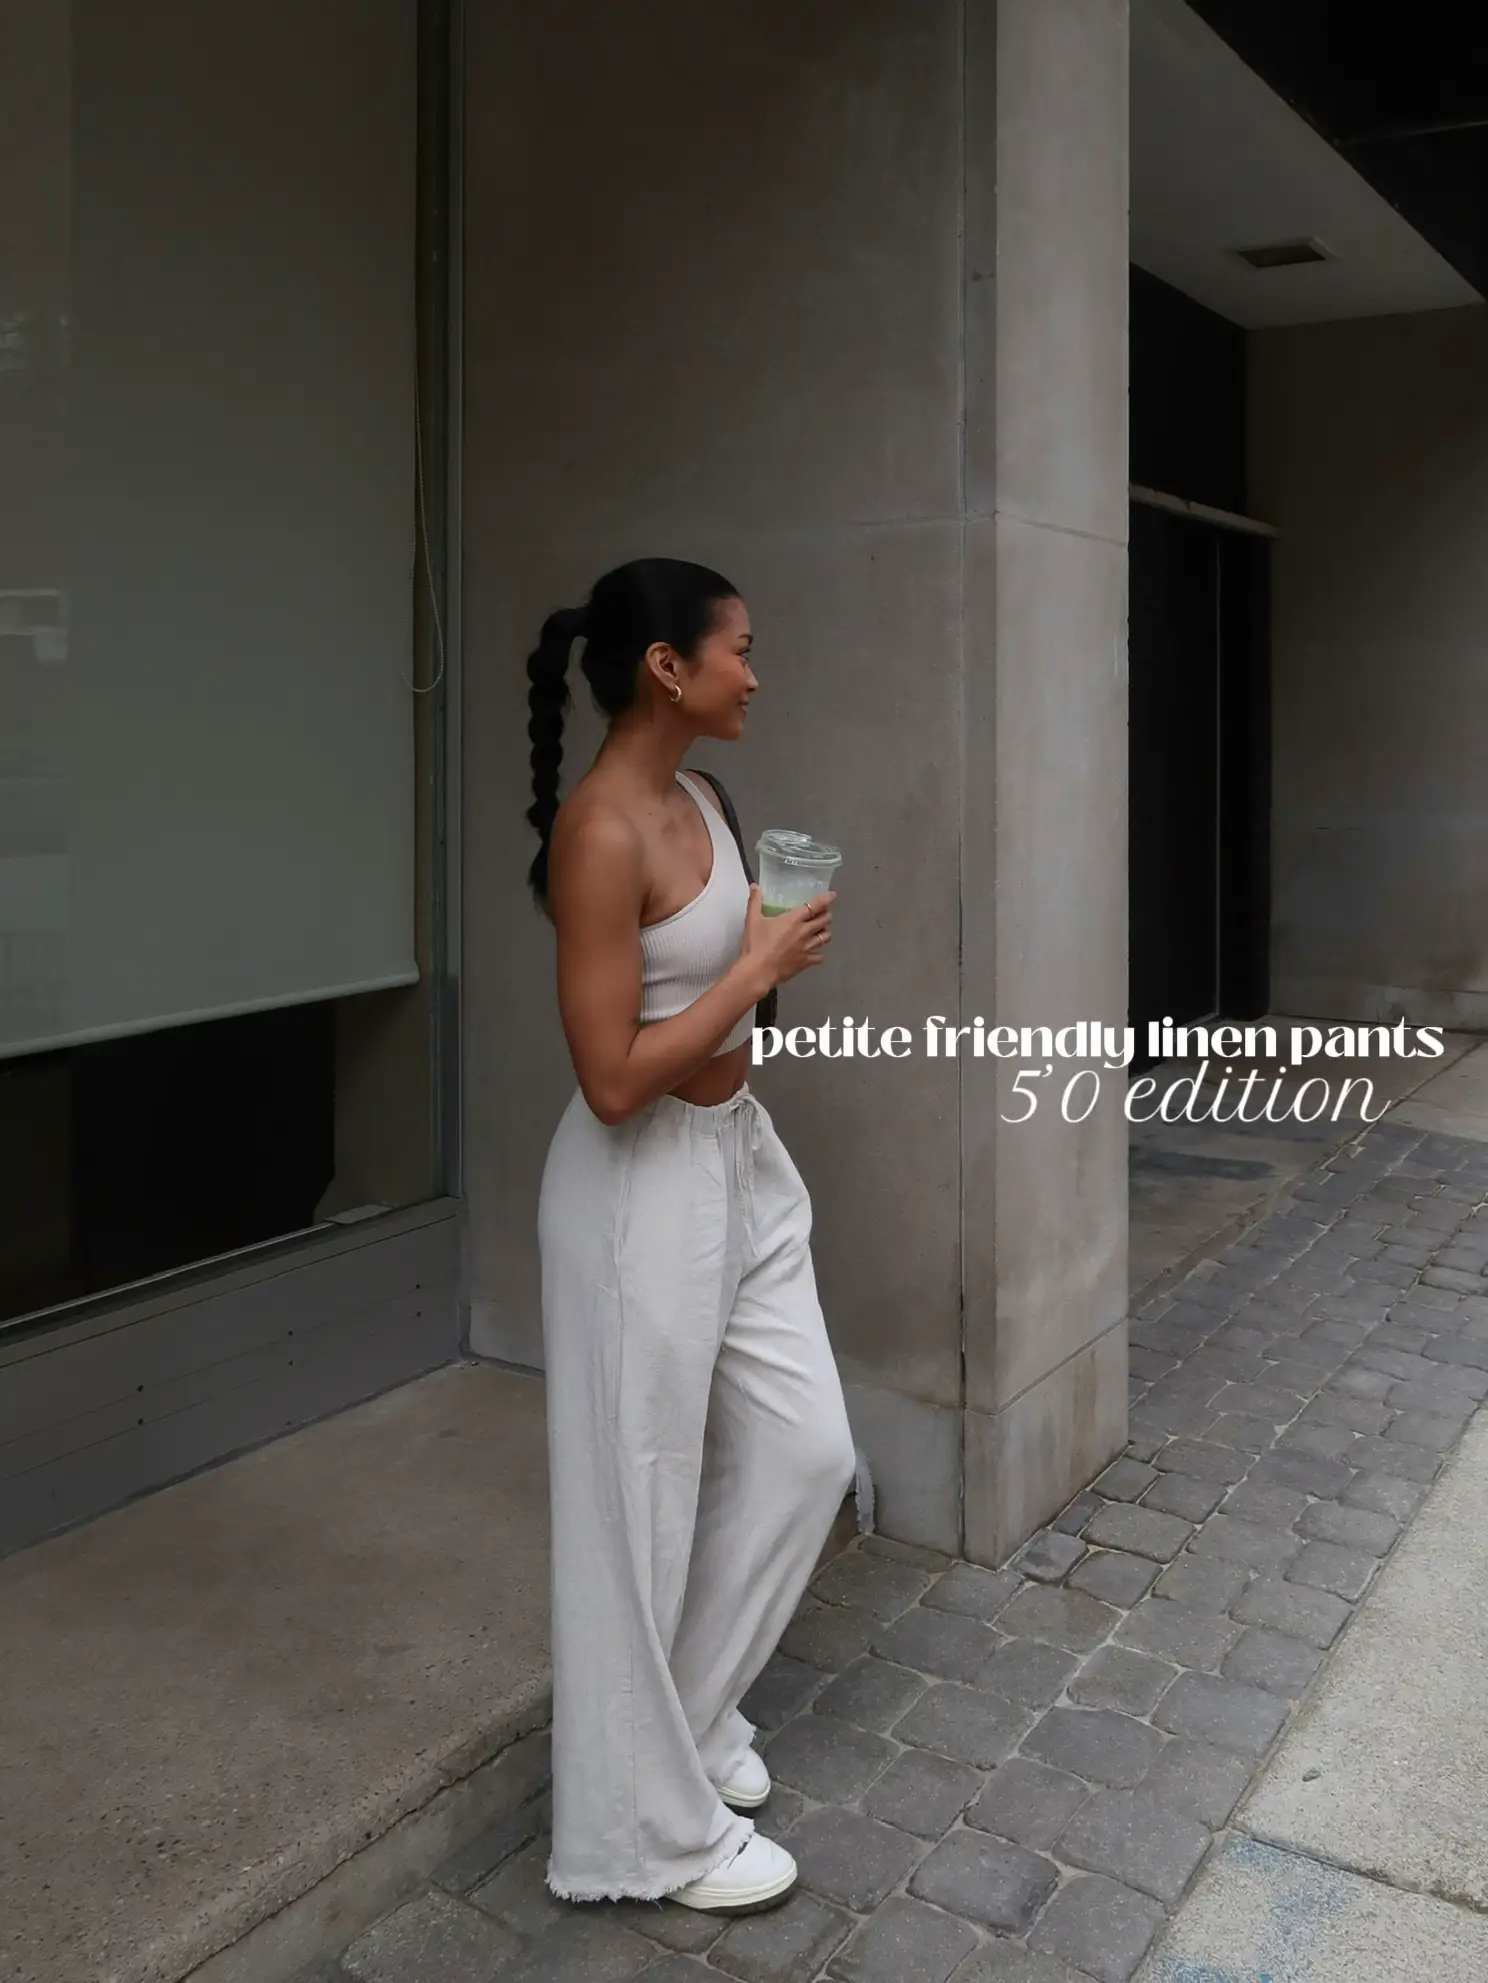 Where can I find similar pants that are actually petite-friendly